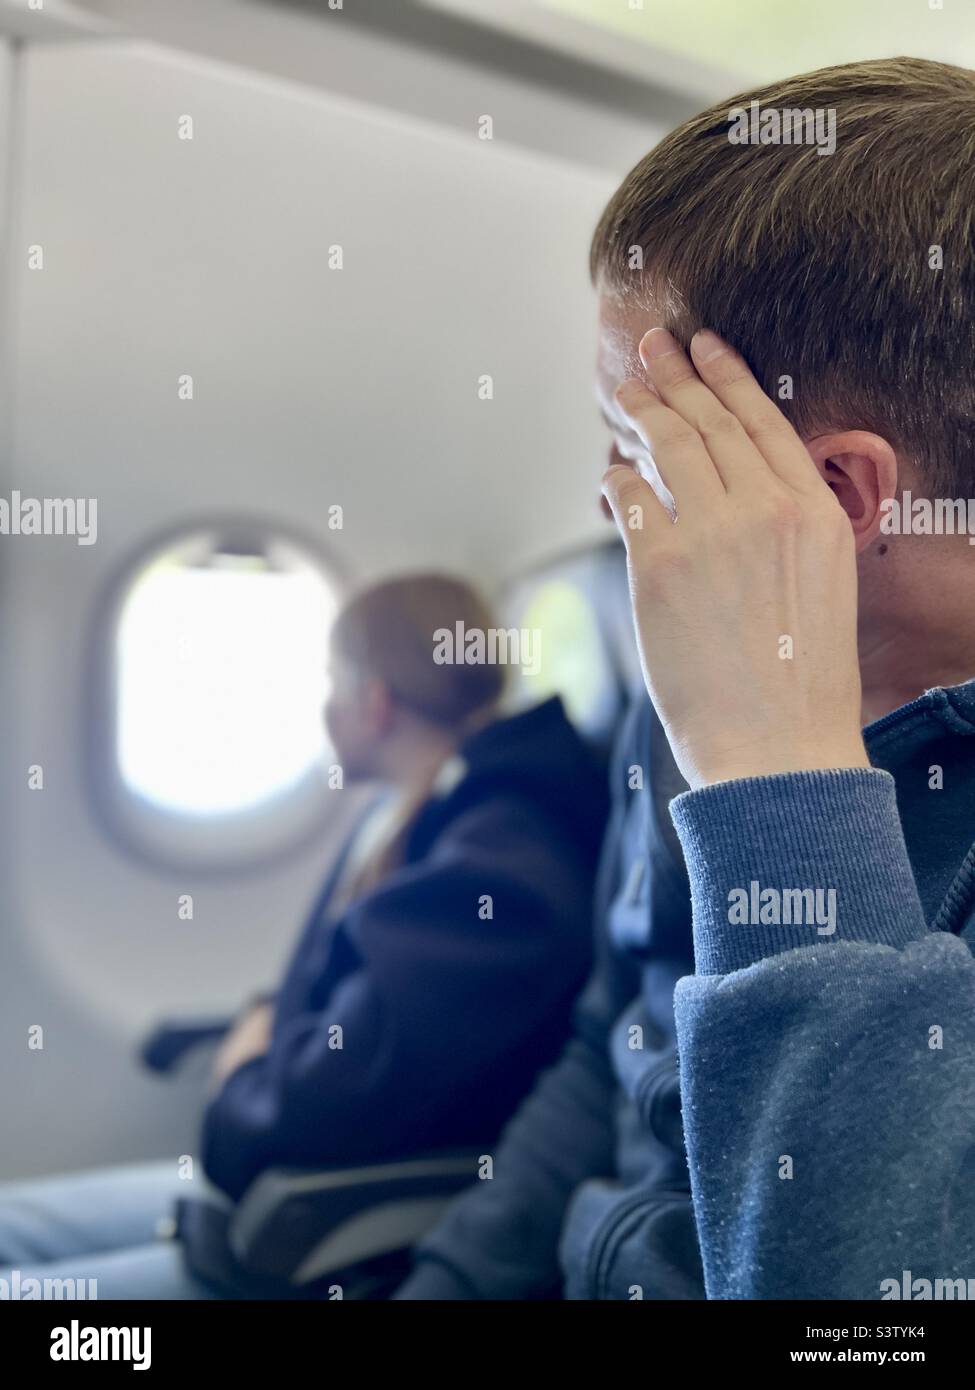 father and daughter are sitting on the plane.  people travel by air.  teenager looks out the window of the plane. Stock Photo